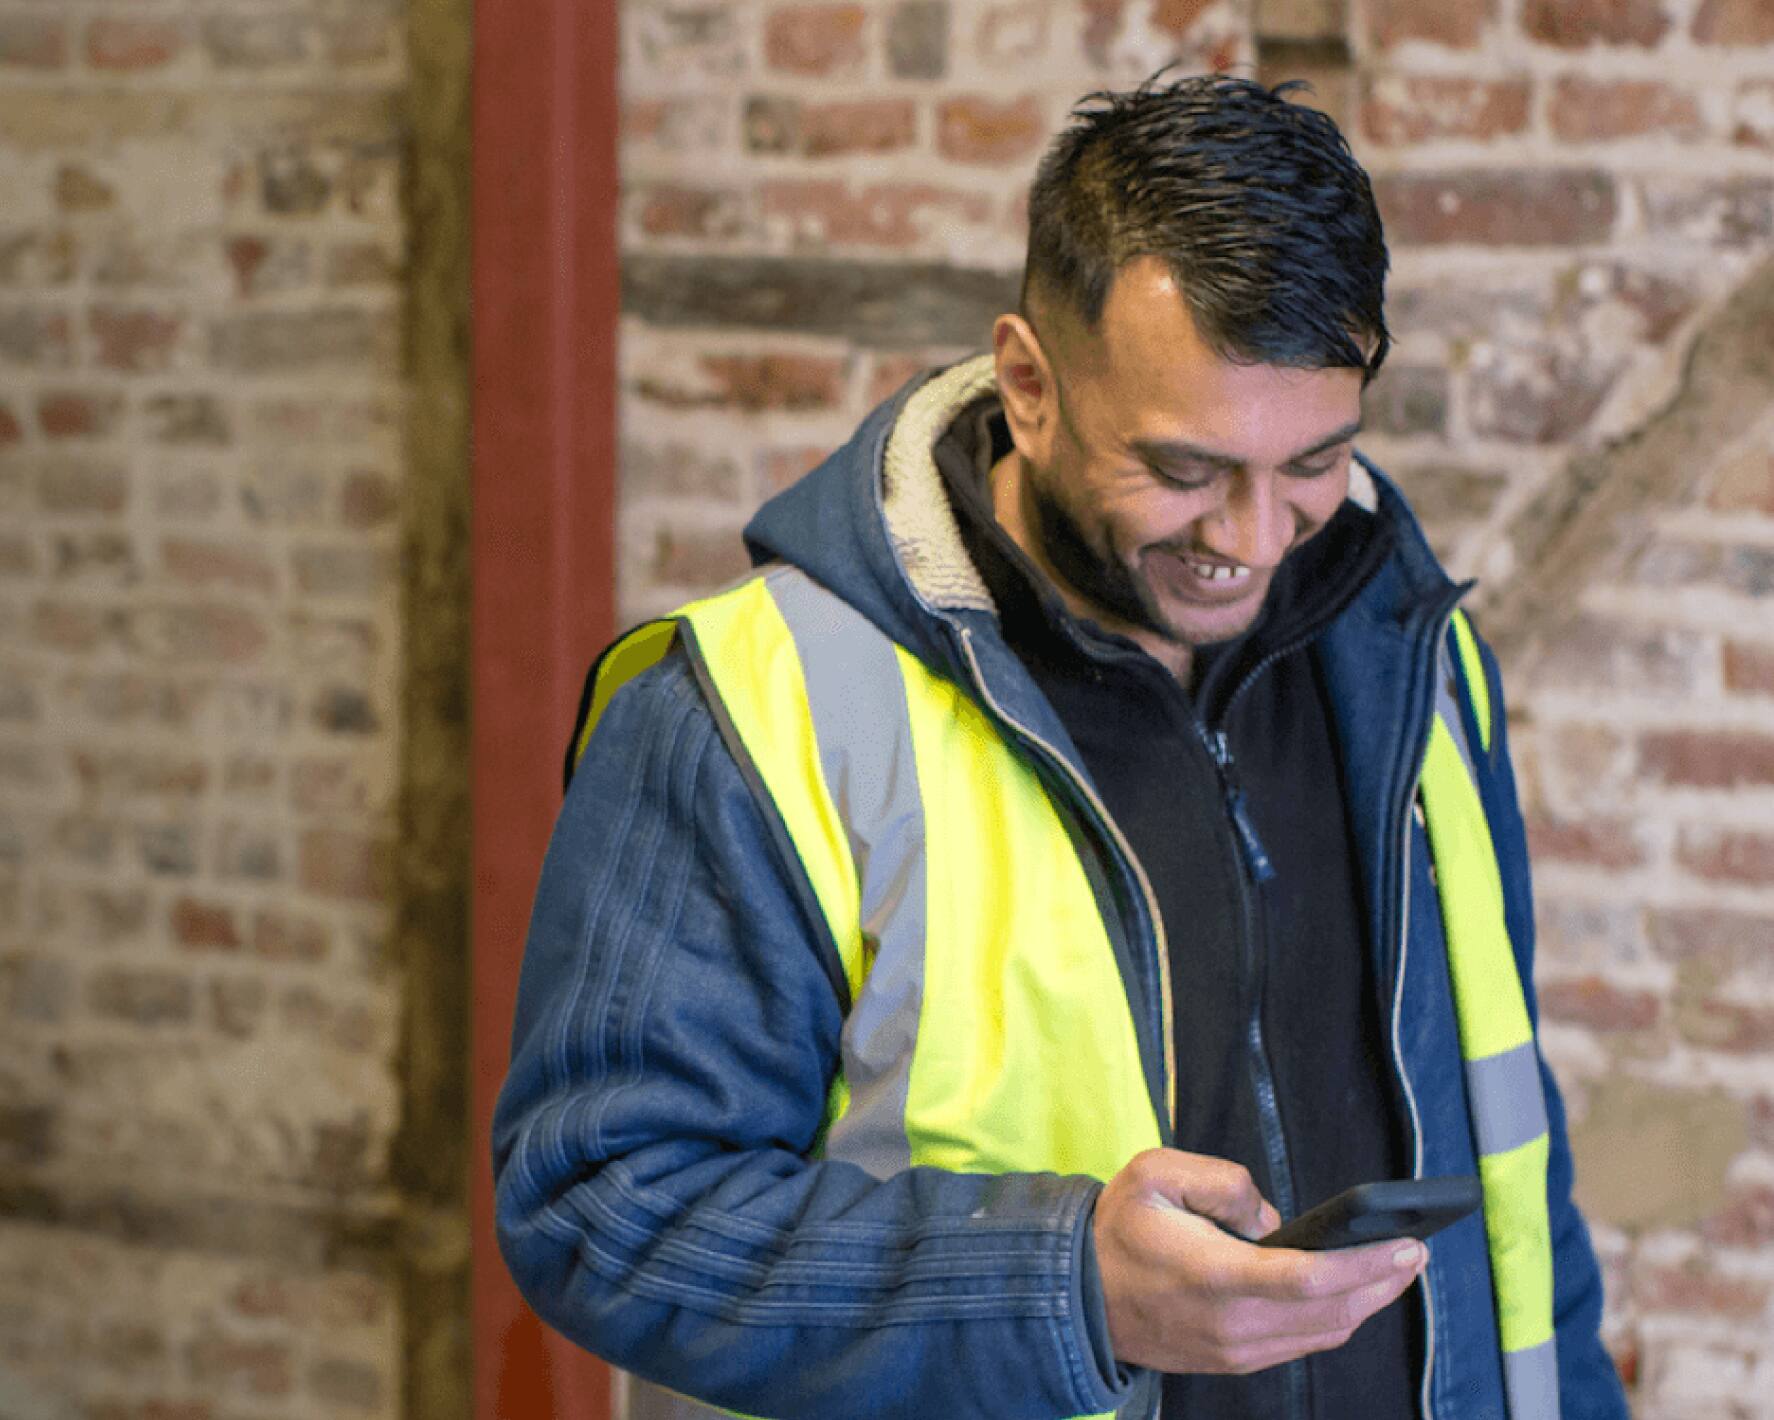 Hitesh, a construction worker, who is wearing high-visibility clothing uses construction accounting software on his mobile.